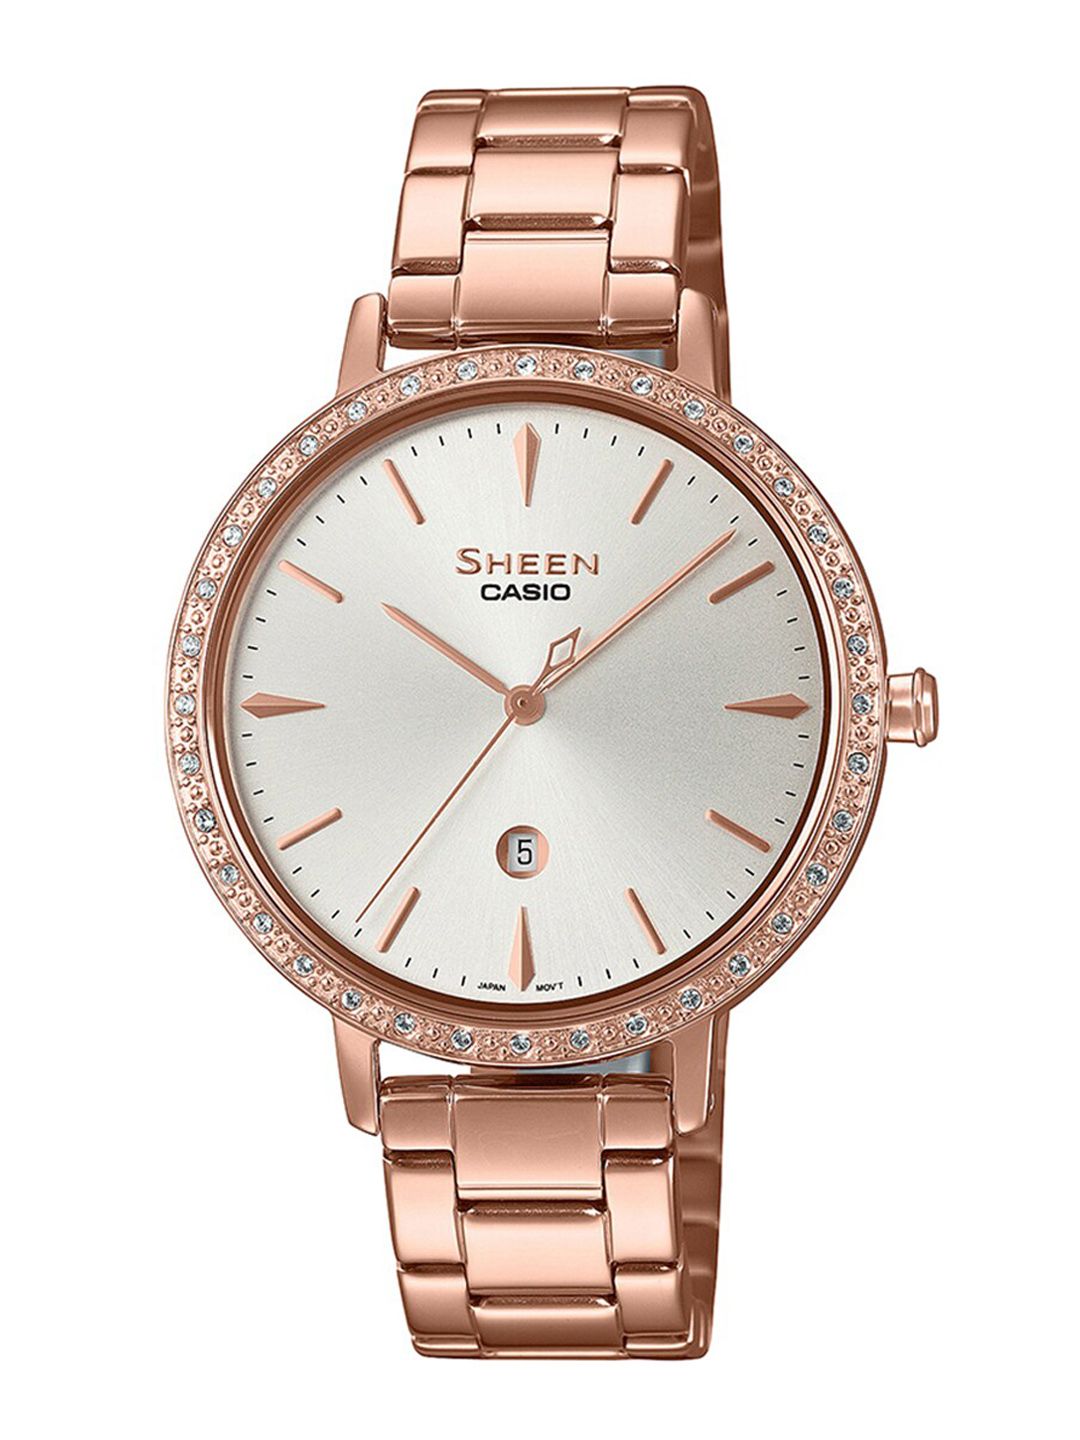 CASIO Women Silver-Toned & Rose Gold Analogue Watch SH231 Price in India